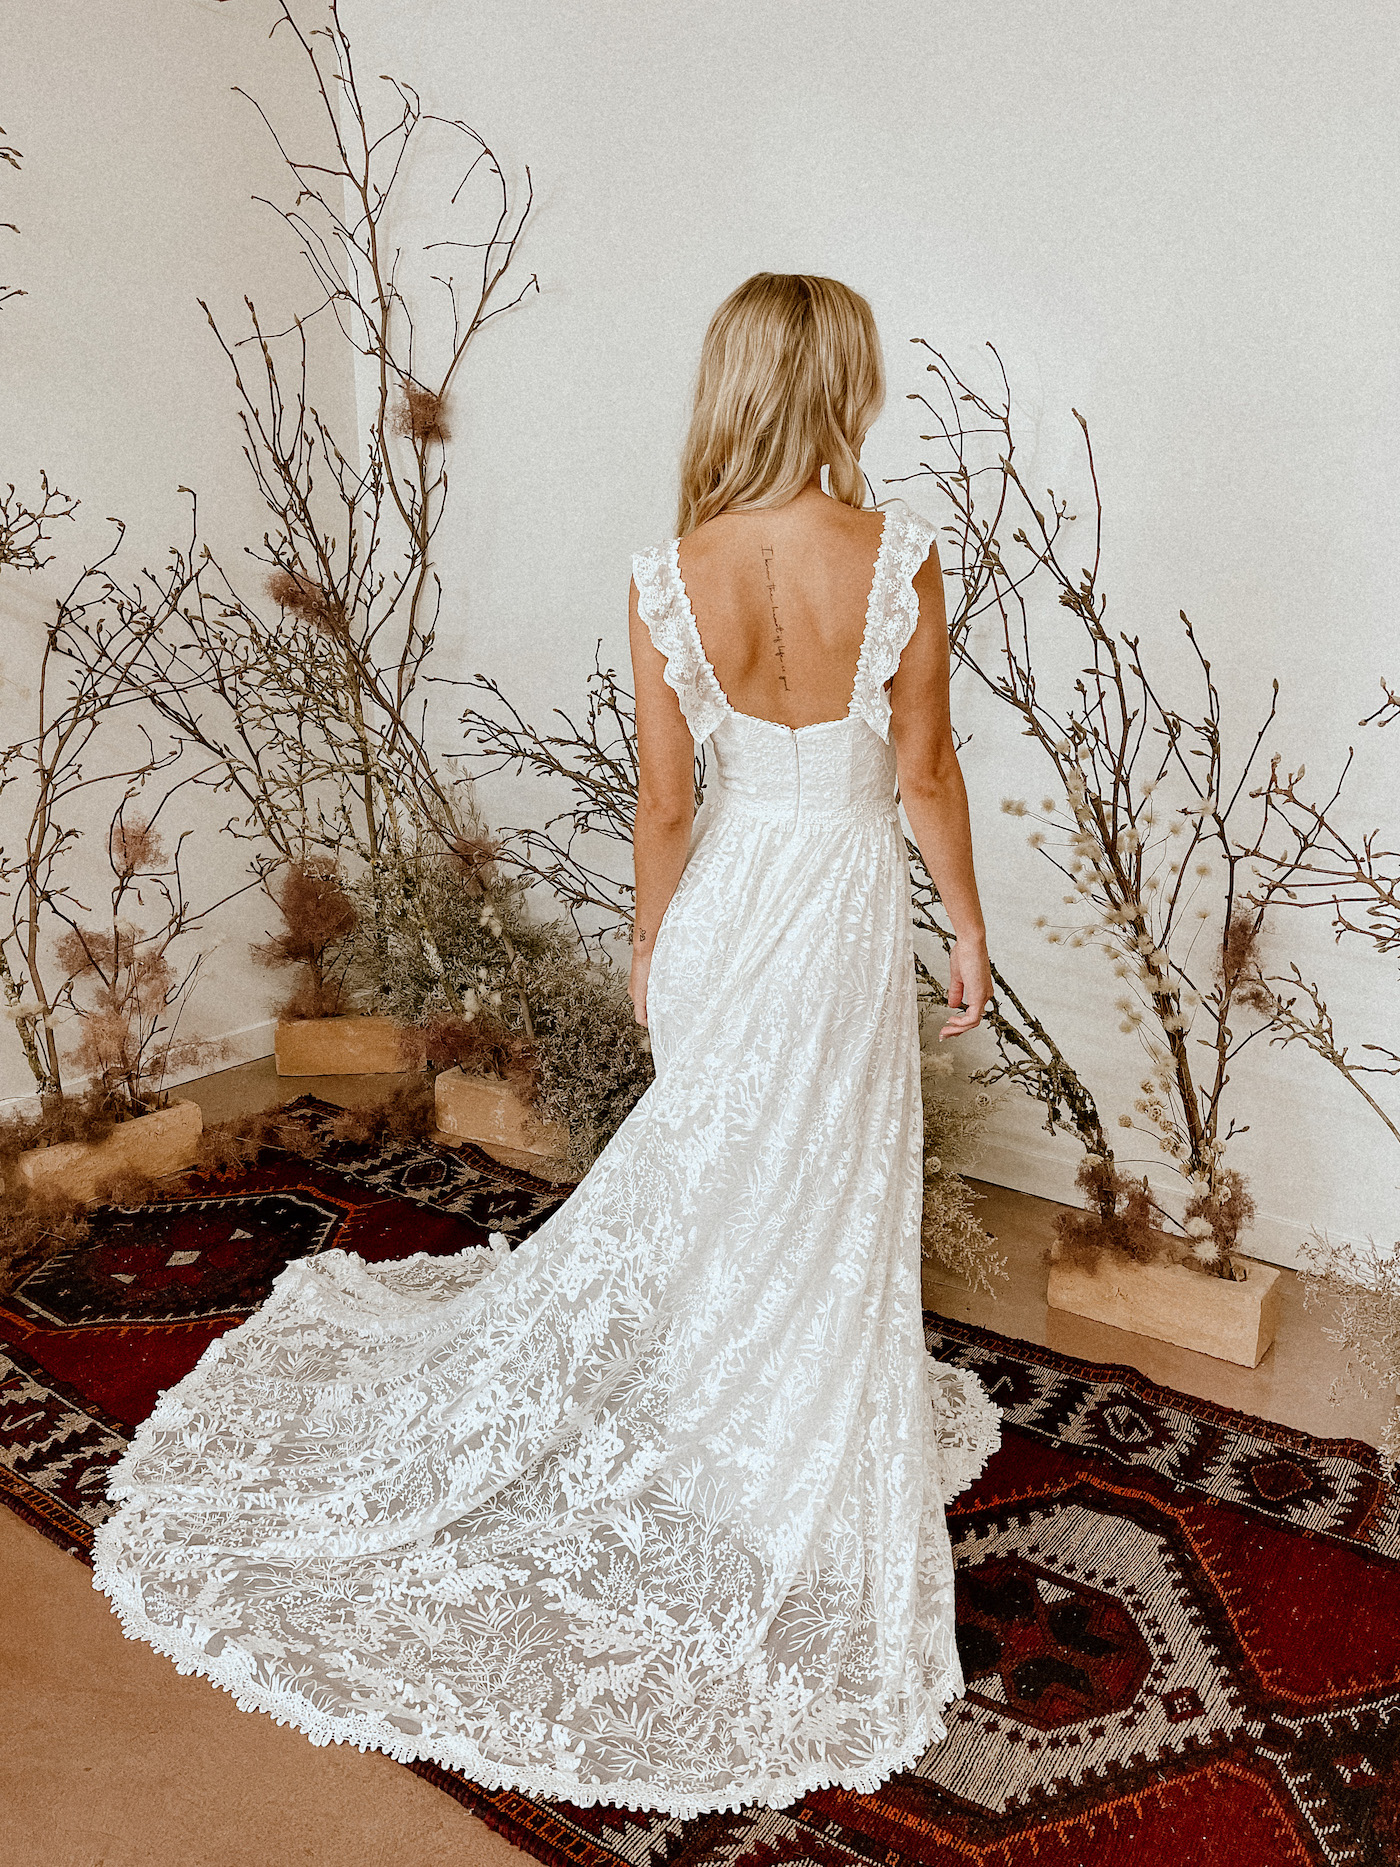 Emma-lace-wedding-dress-fit-and-flare-ethereal